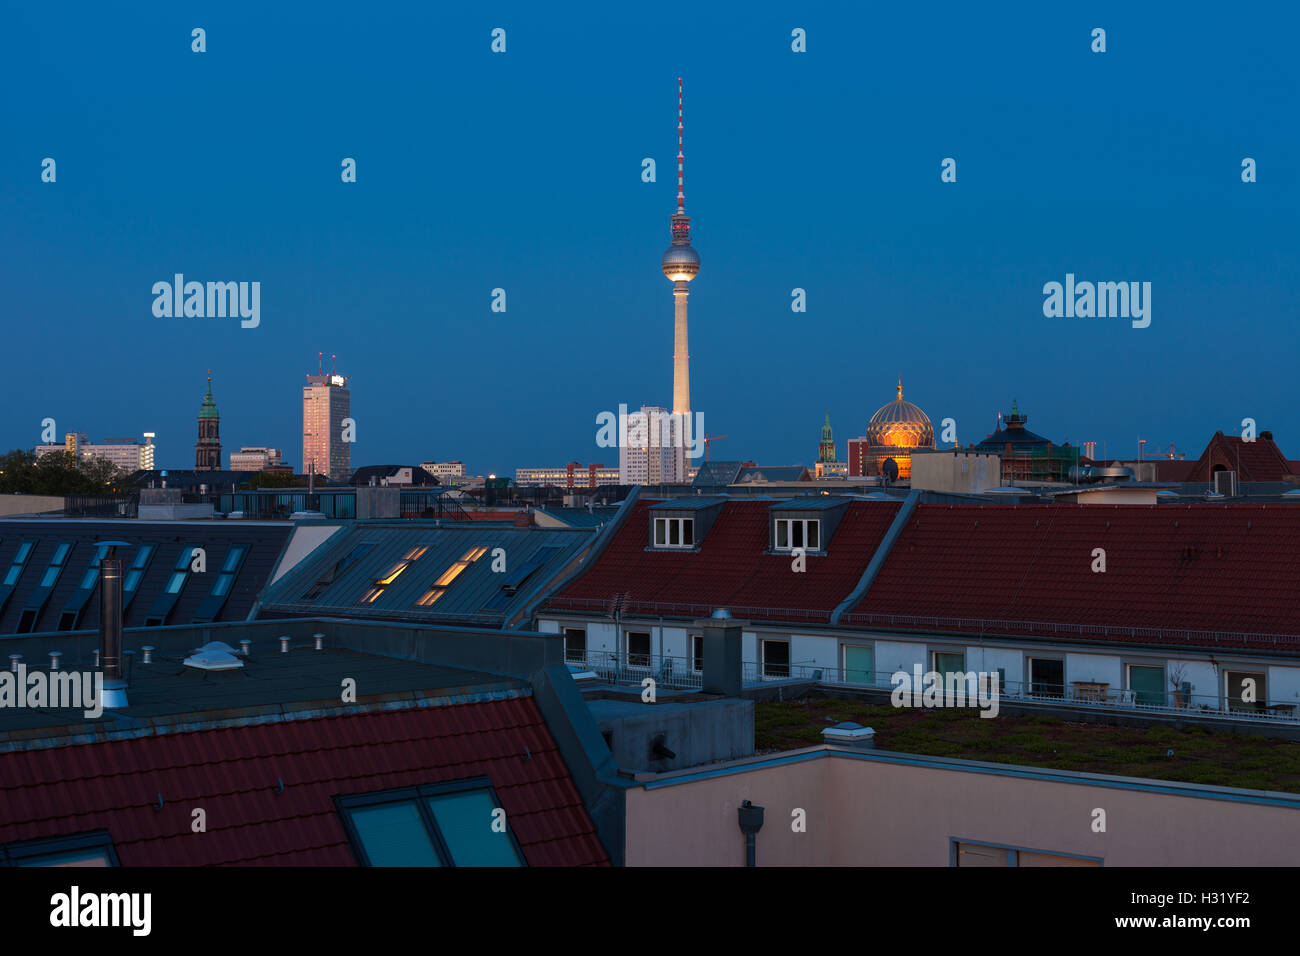 Berlin skyline with Fernsehturm (TV Tower), Neue Synagogue, and townhomes Stock Photo